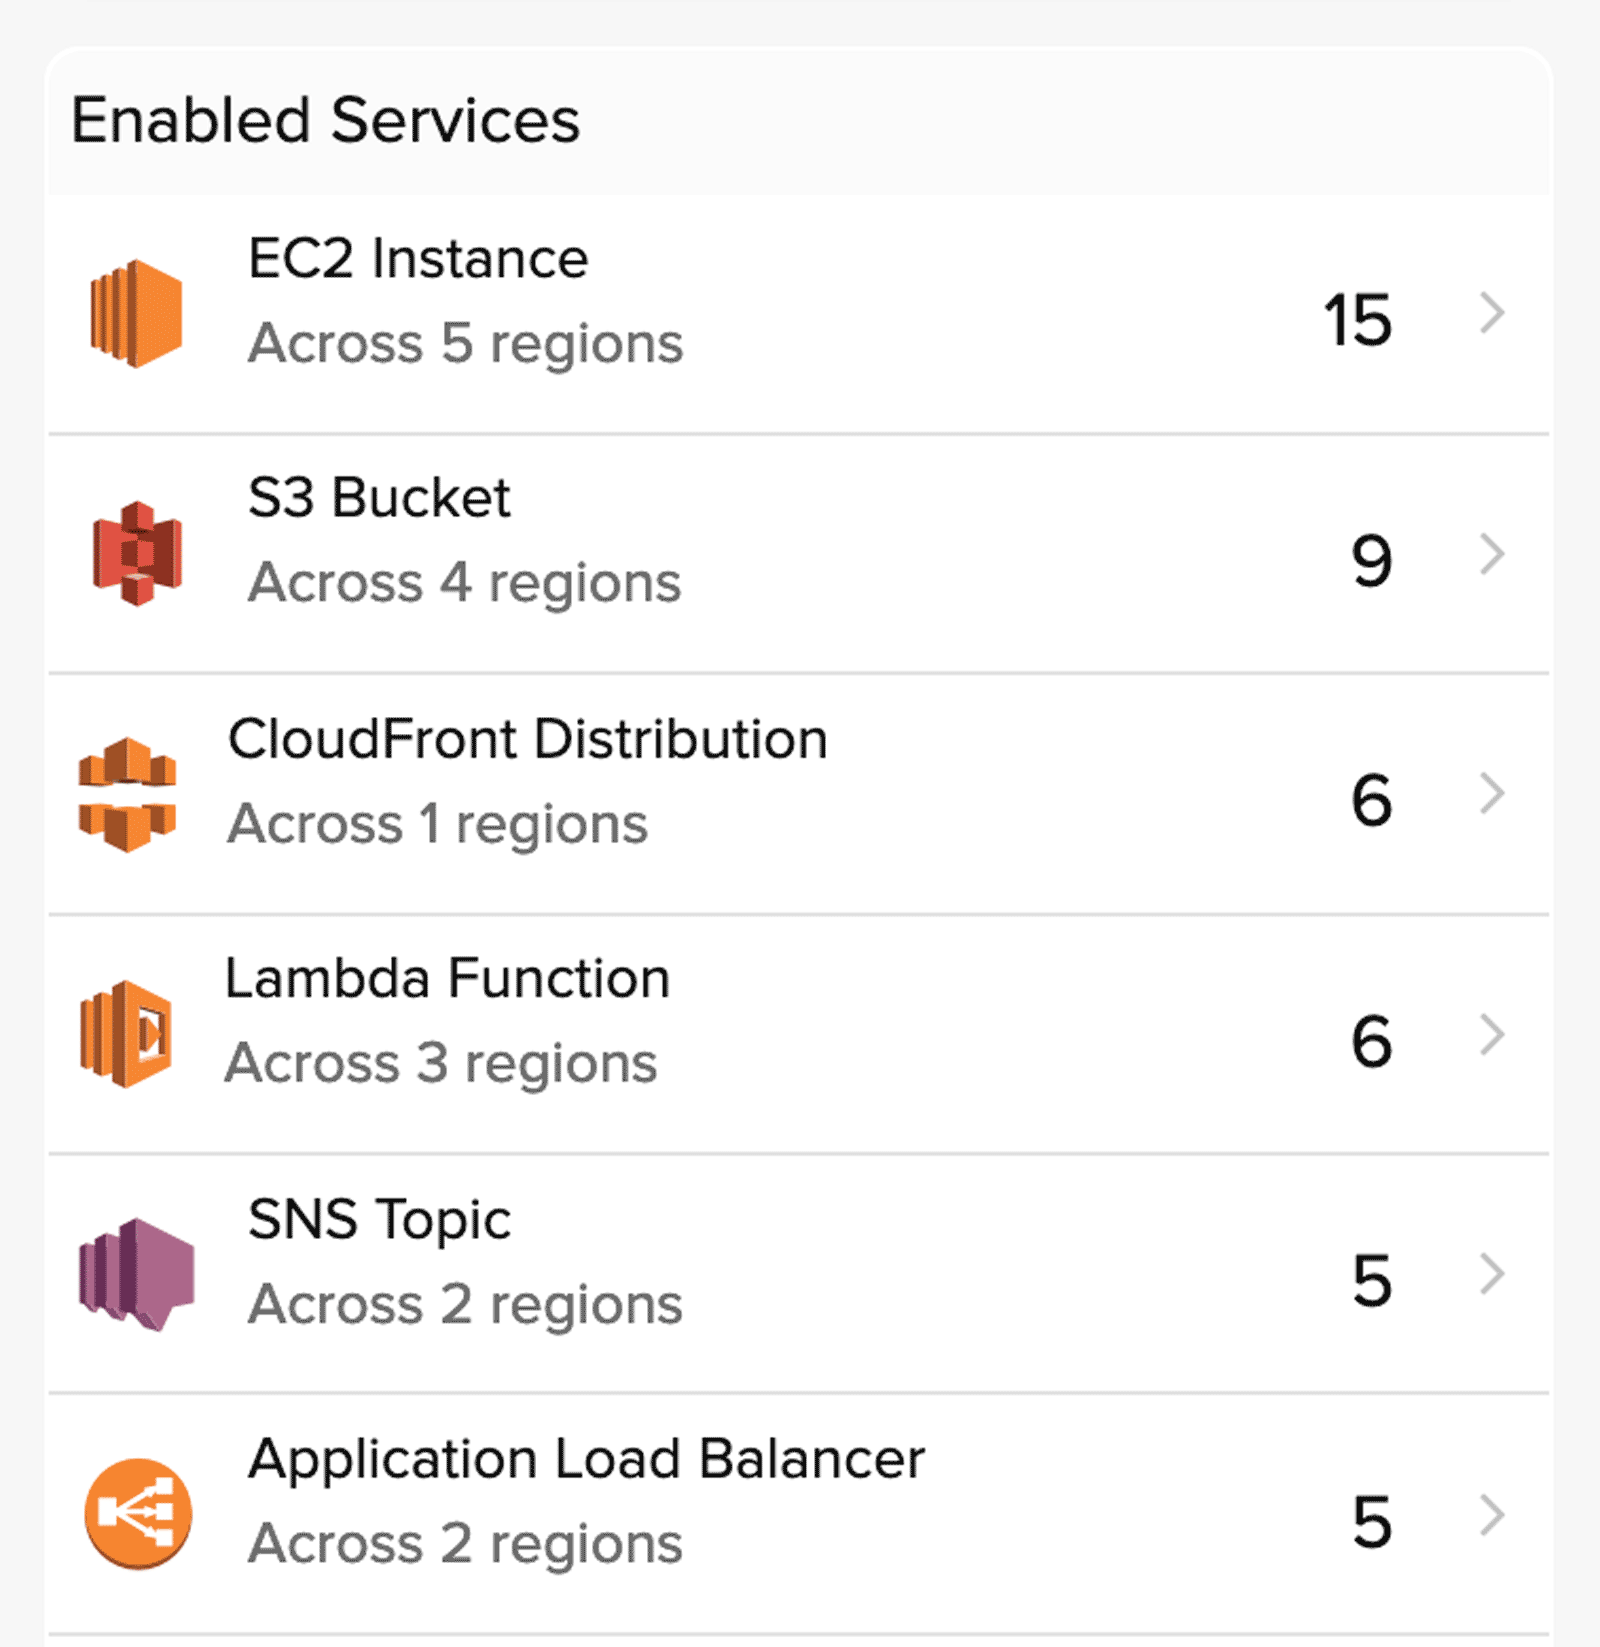  A view showing AWS services along with aggregate resource count